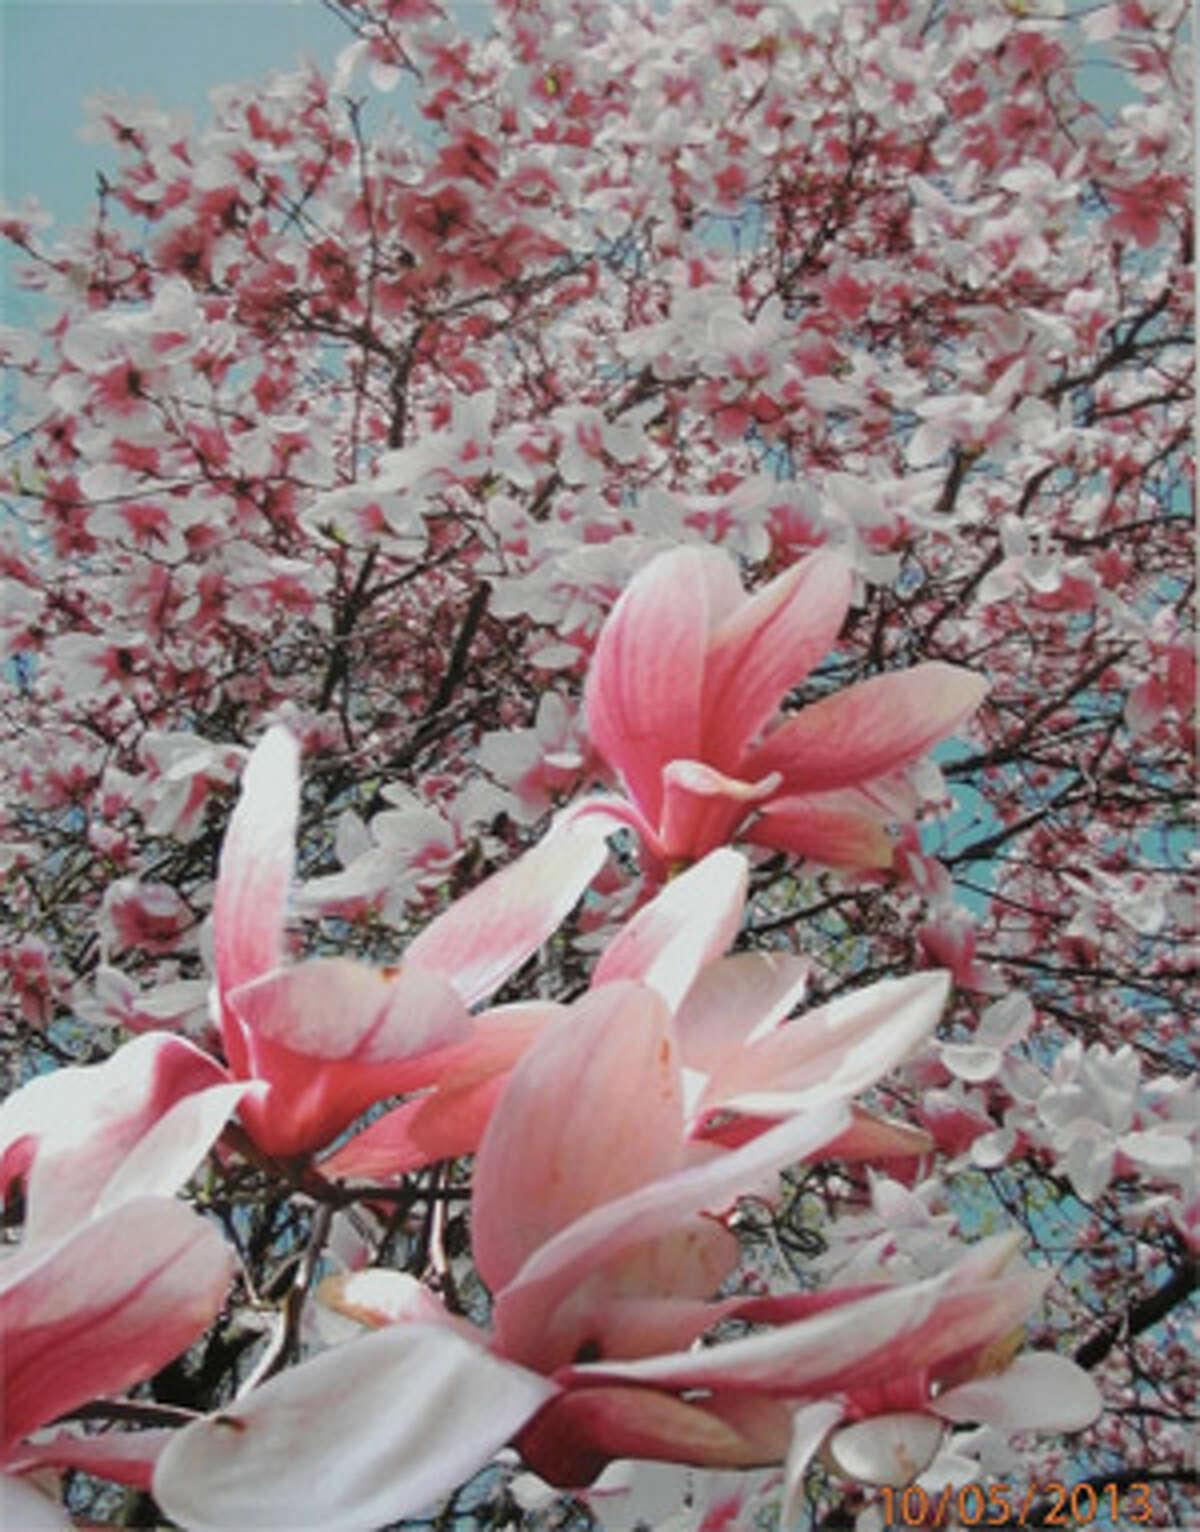 “Magnolia Tree” by Leonard Ames, one of last year’s photo contest winners.